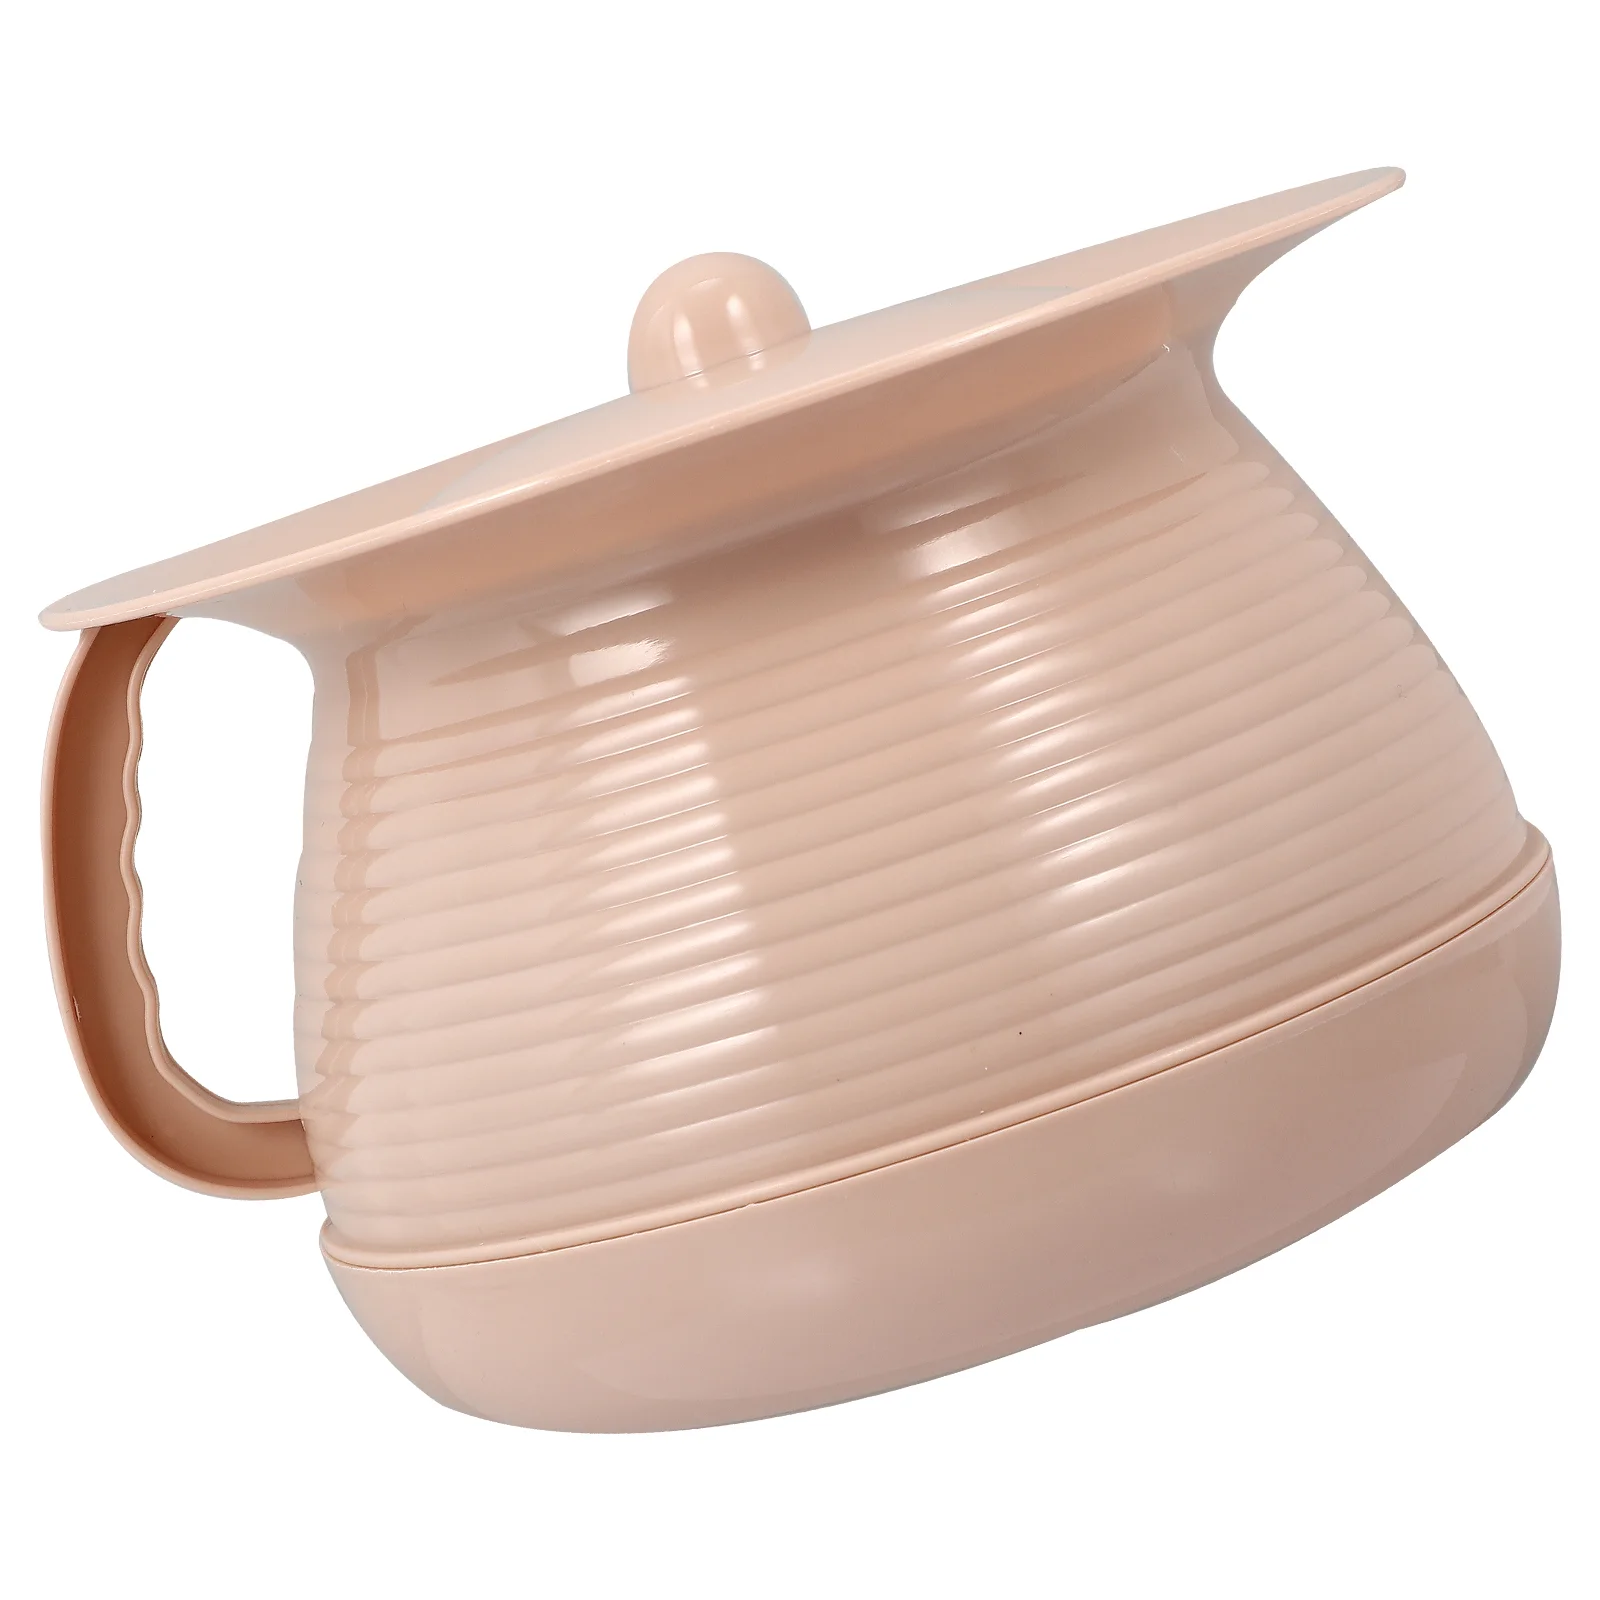 

Urinal Pot Chamber Urine For With Lid Pee Bucket Pots Bottle Spittoon Toiletbedside Potty Bedpan Adults Portable Urinals